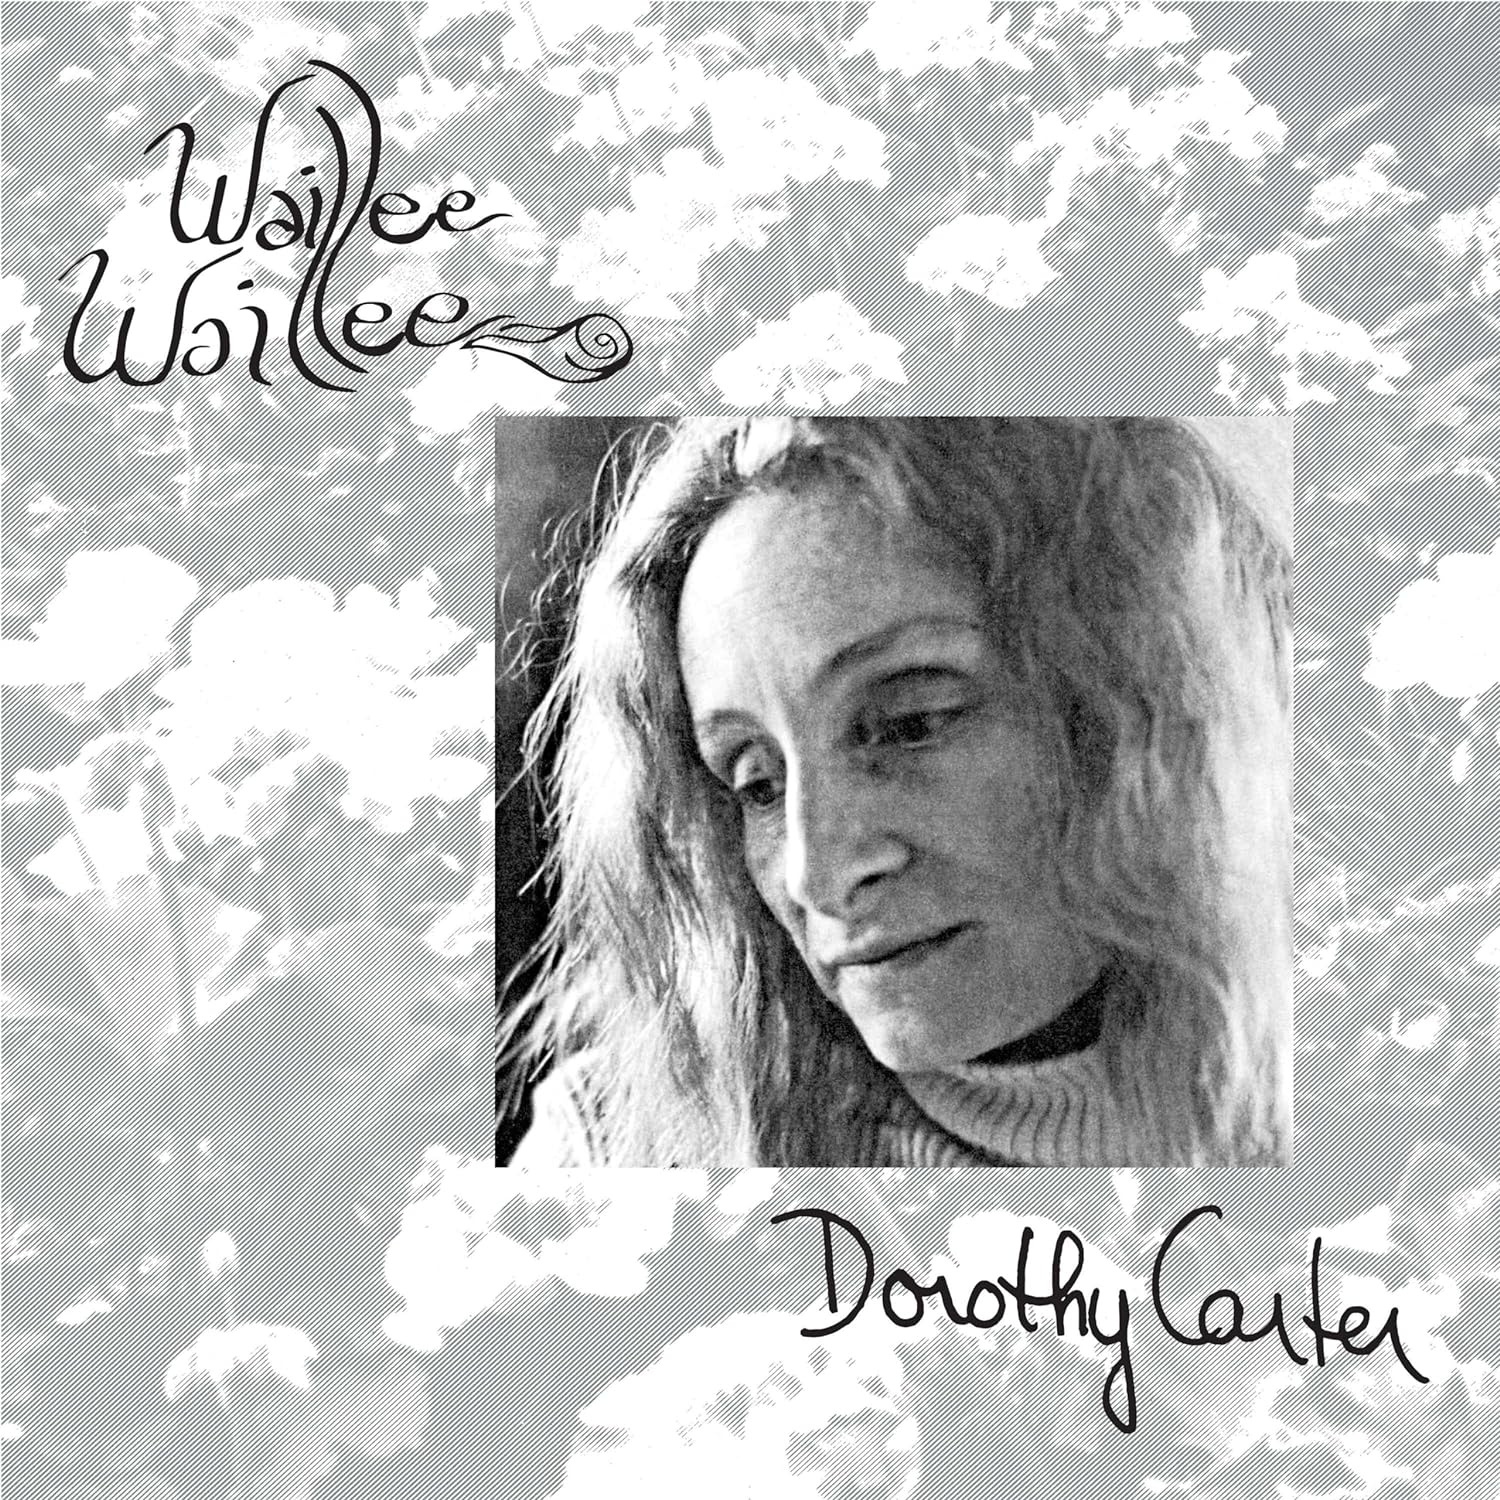 Dorothy Carter - Waillee Waillee vinyl cover